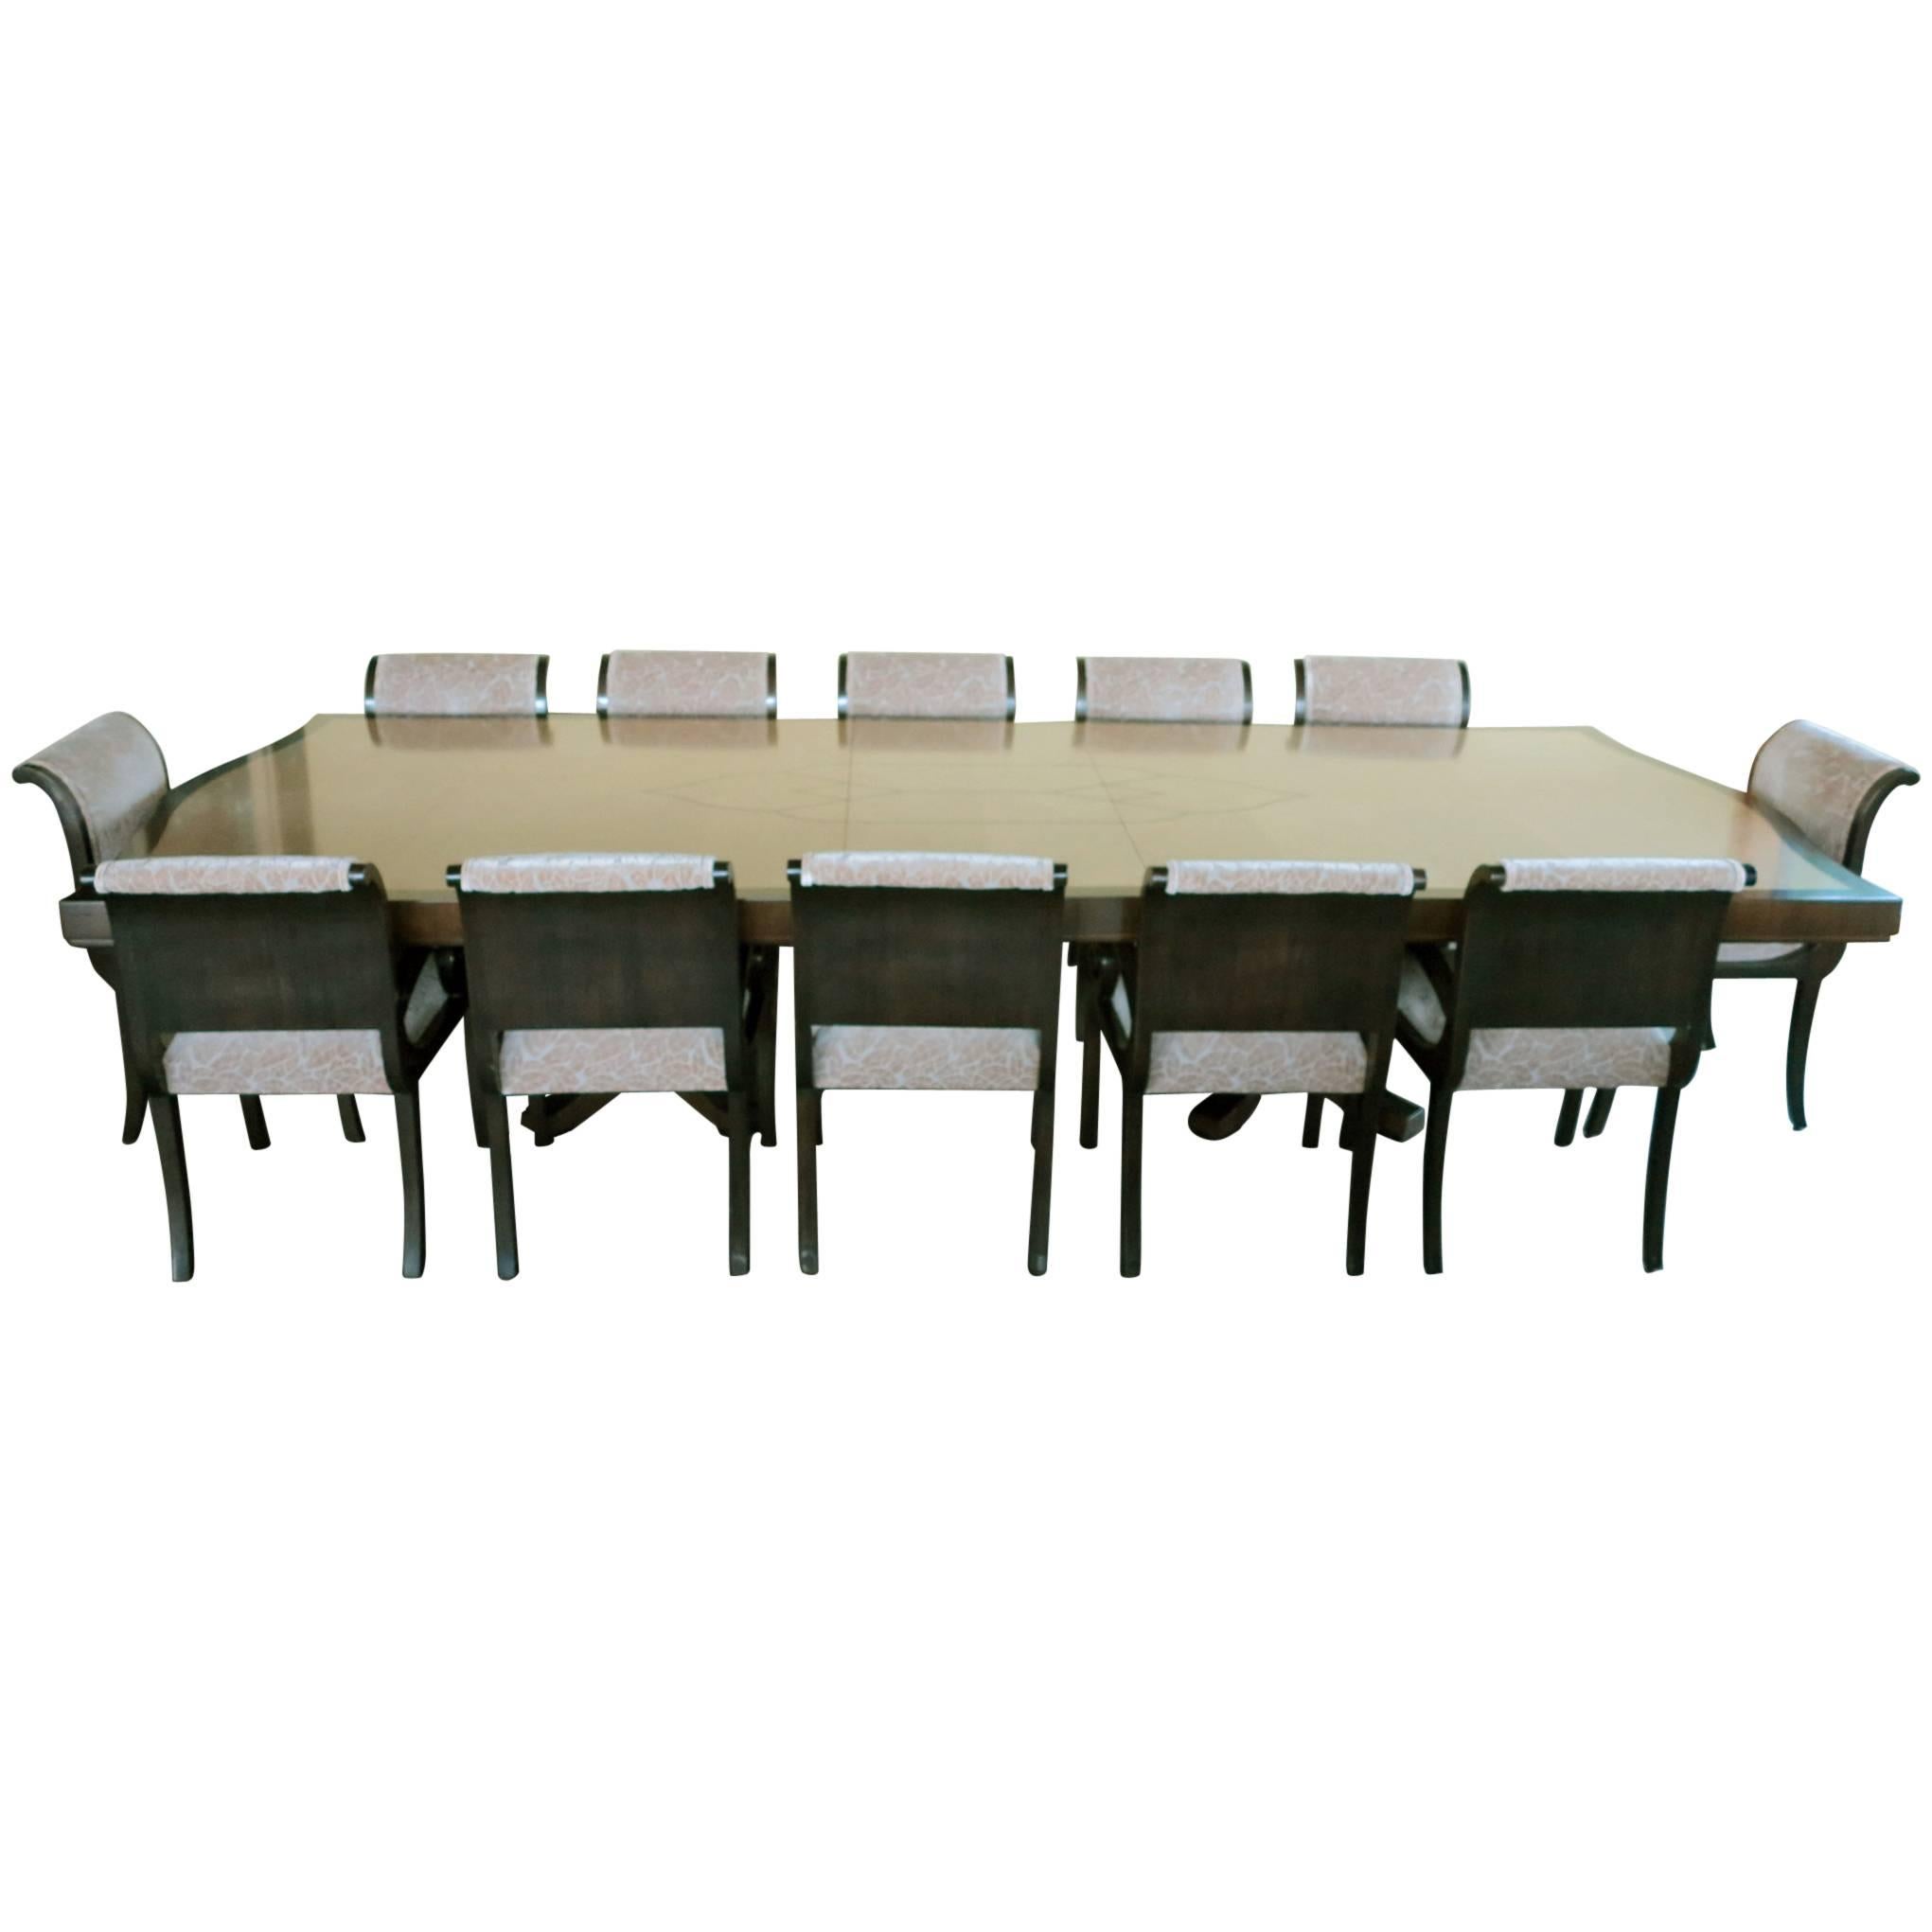 Enrique Garcel Custom-Made Dining Table 12 Chairs Art Deco Style